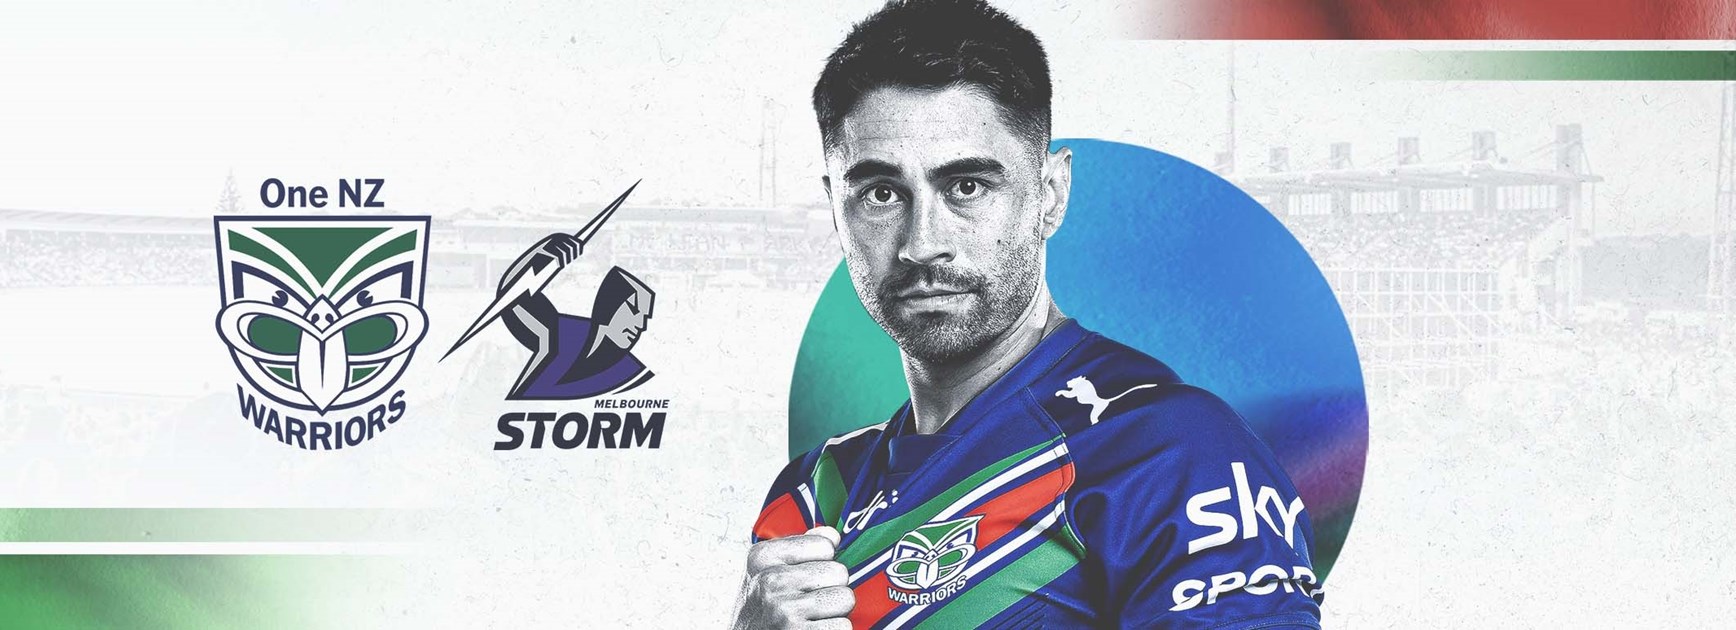 Trial tickets on sale for club's Storm trial in Christchurch